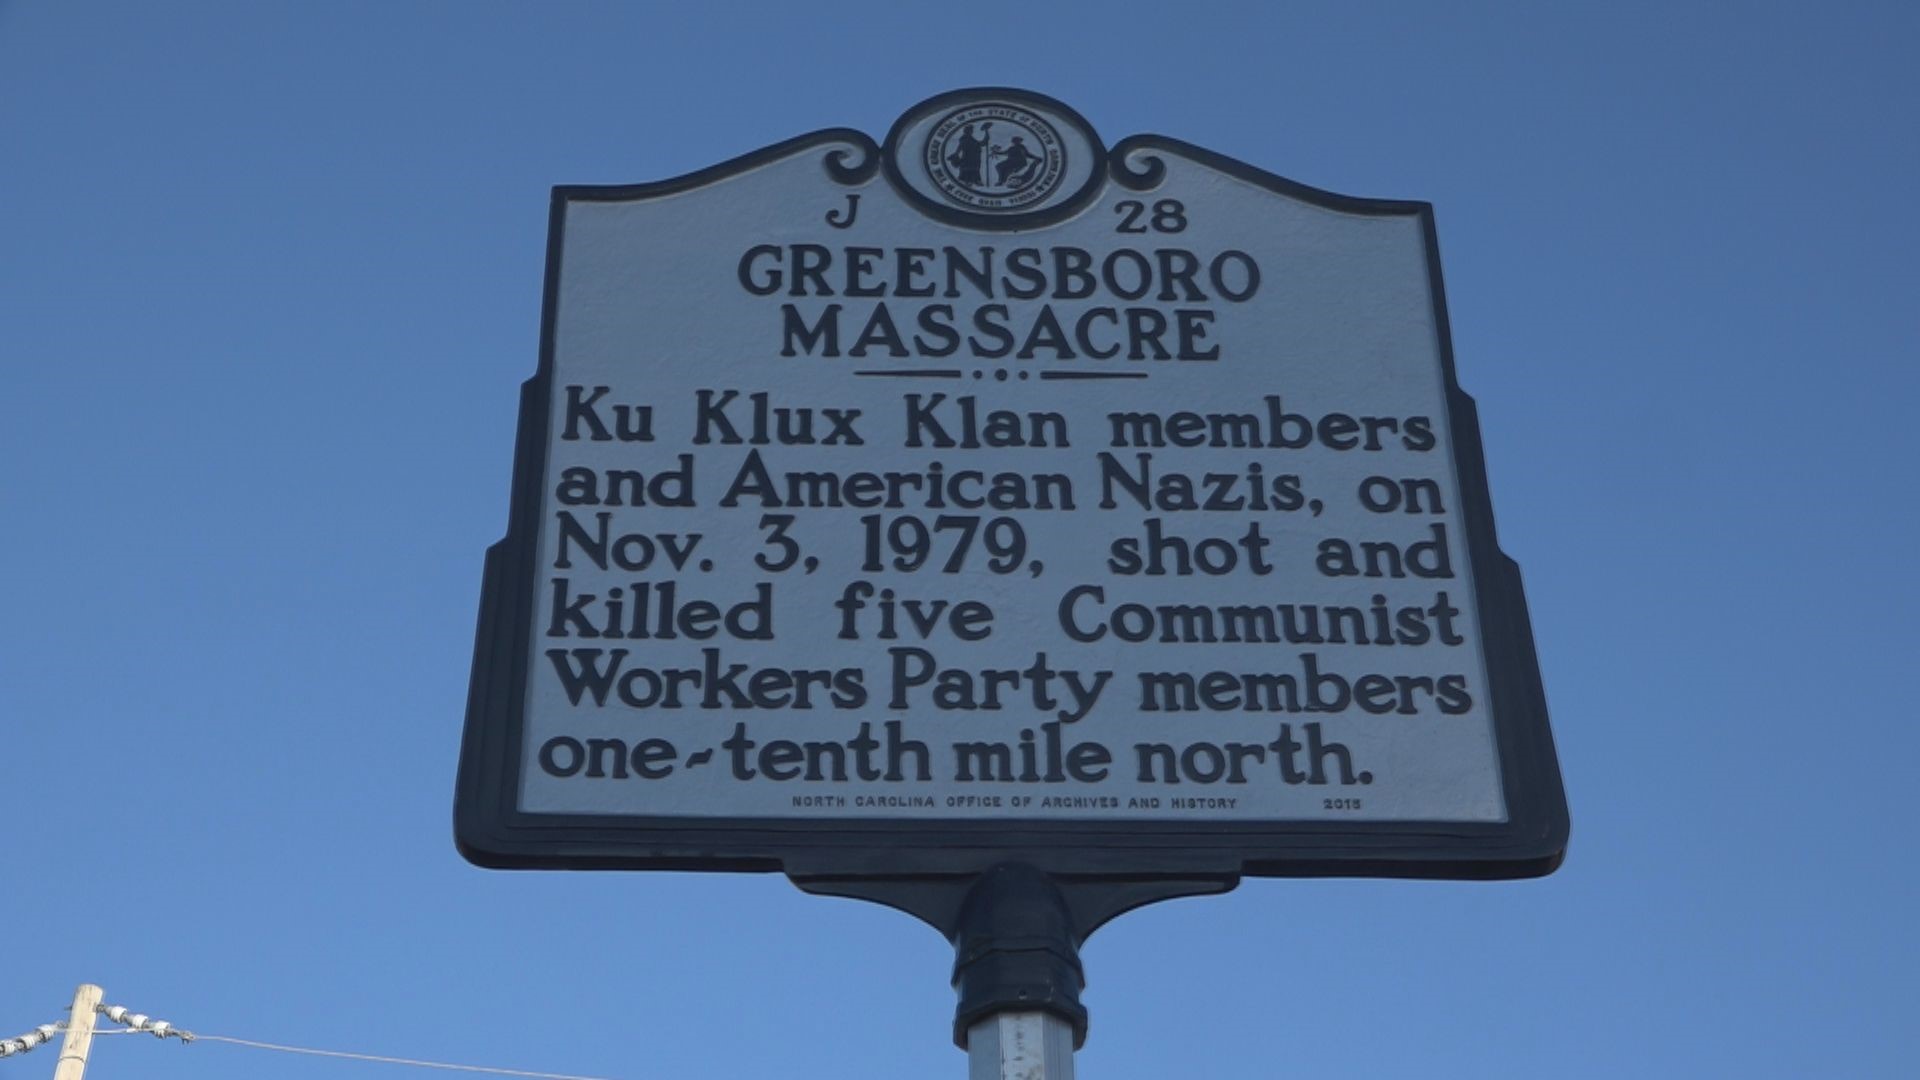 2 Wants To Know uncovered new information about how survivors have tried to help the city heal over the past 40 years since the Greensboro Massacre.